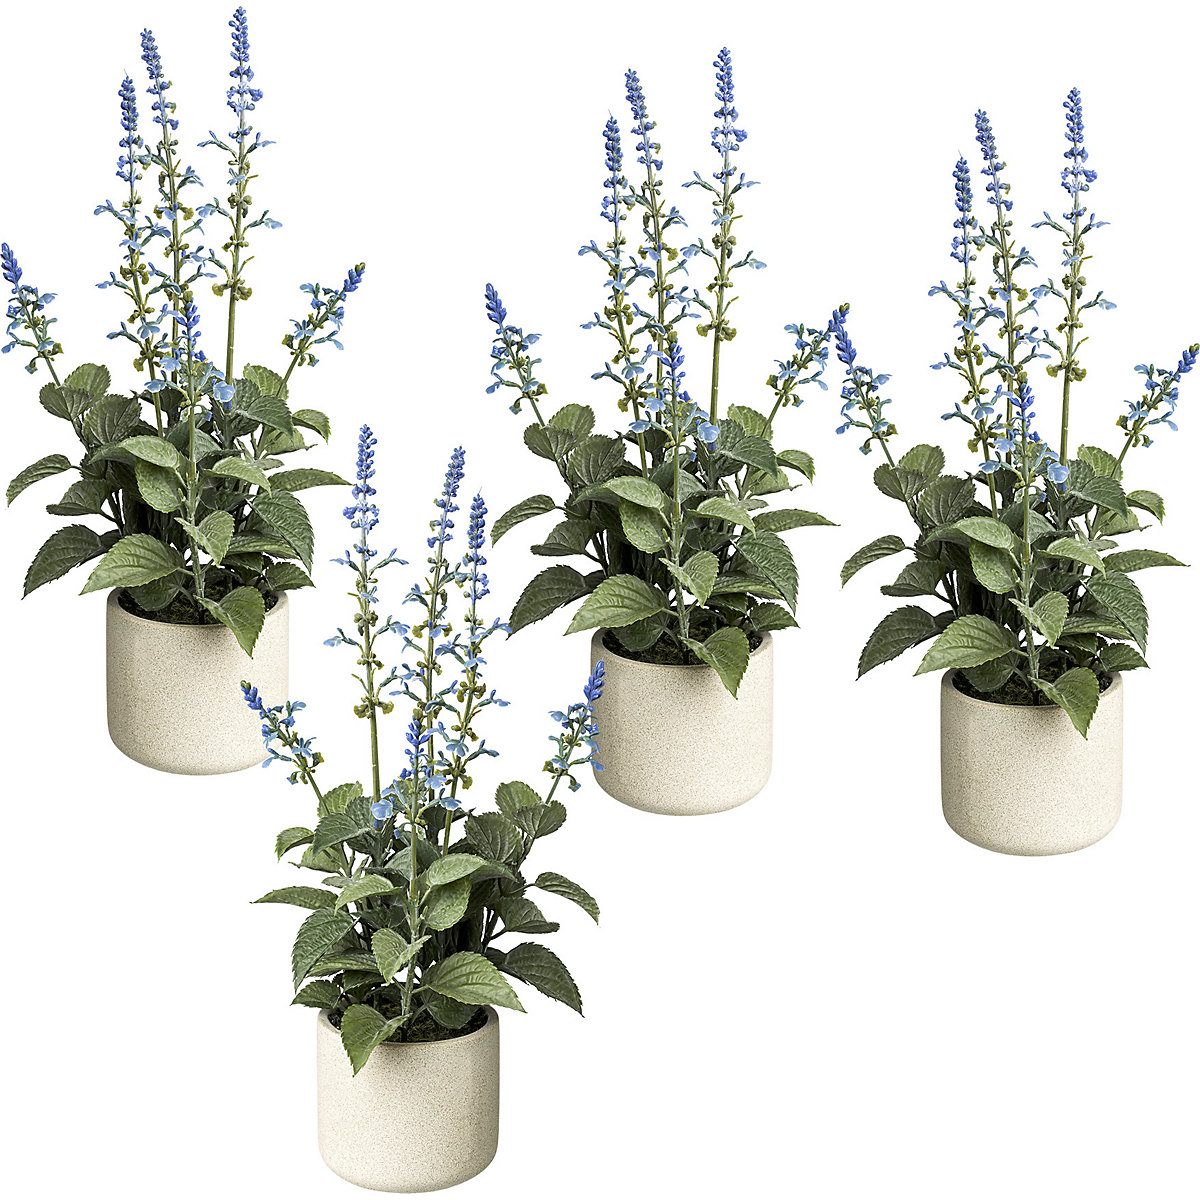 Salvia in a cement pot